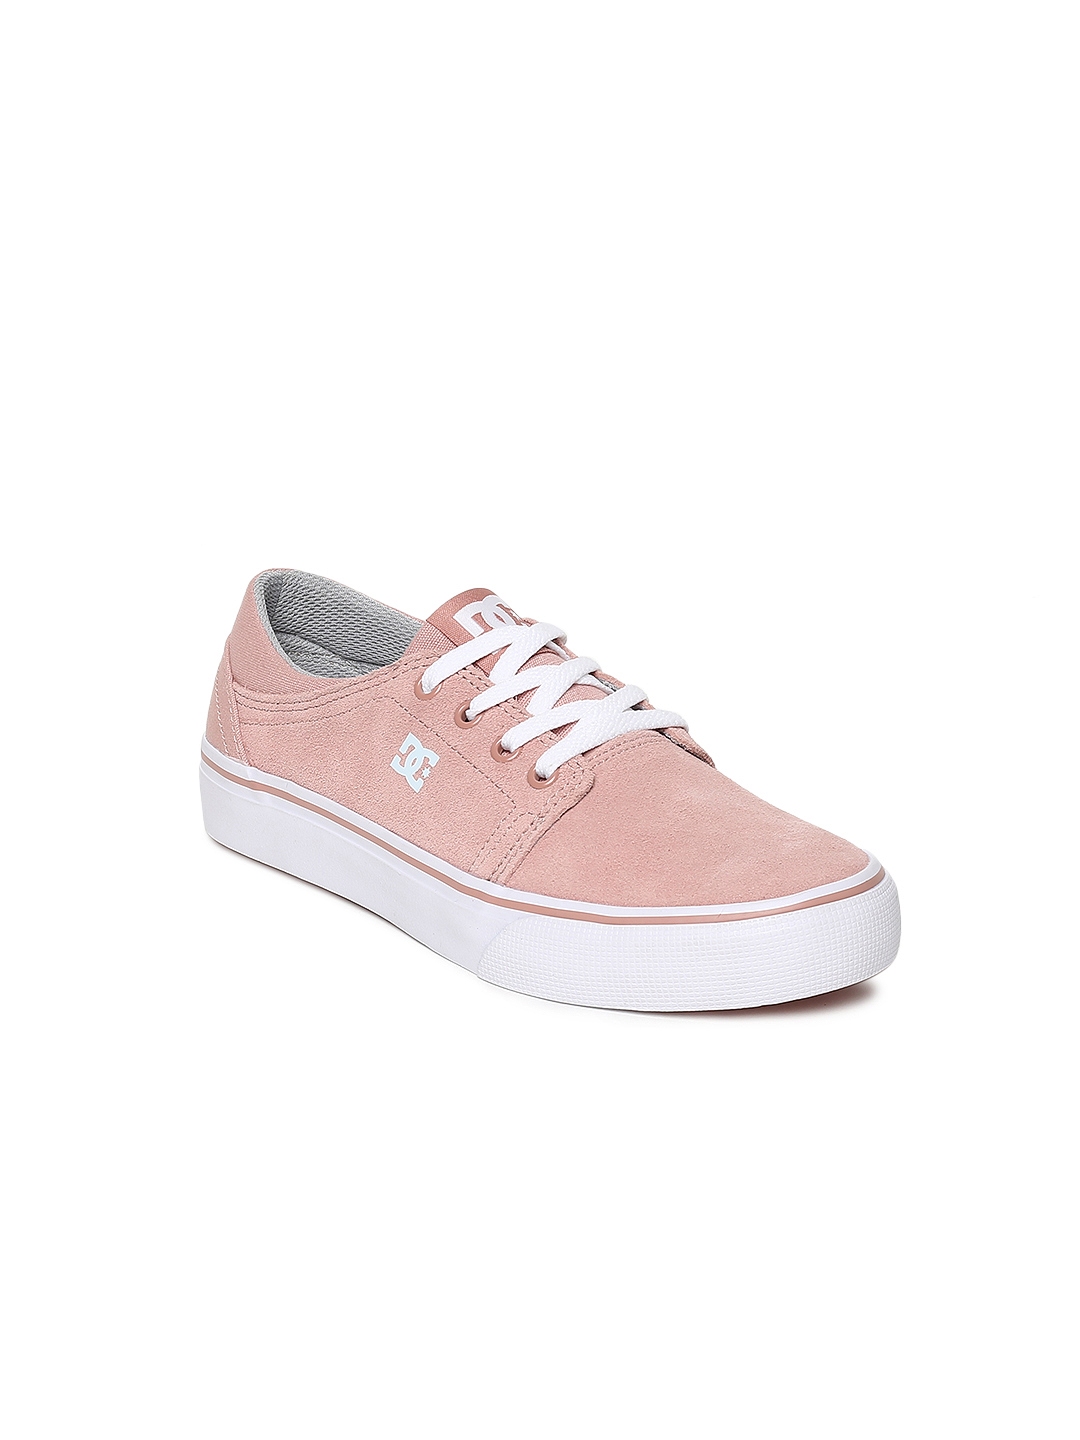 Buy DC Girls Peach Coloured Solid 